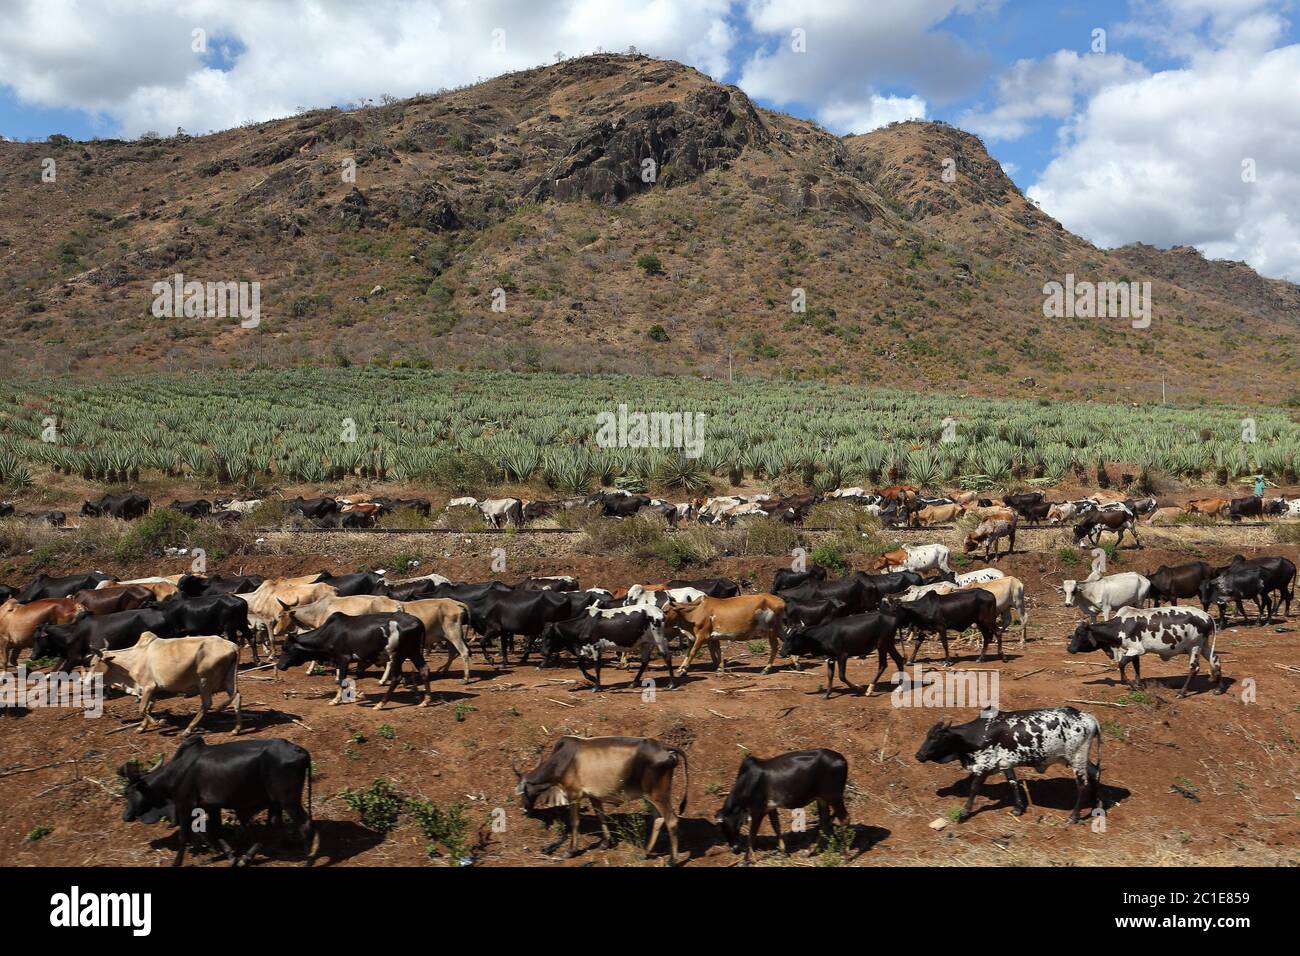 Cows and cattle in Tanzania Stock Photo